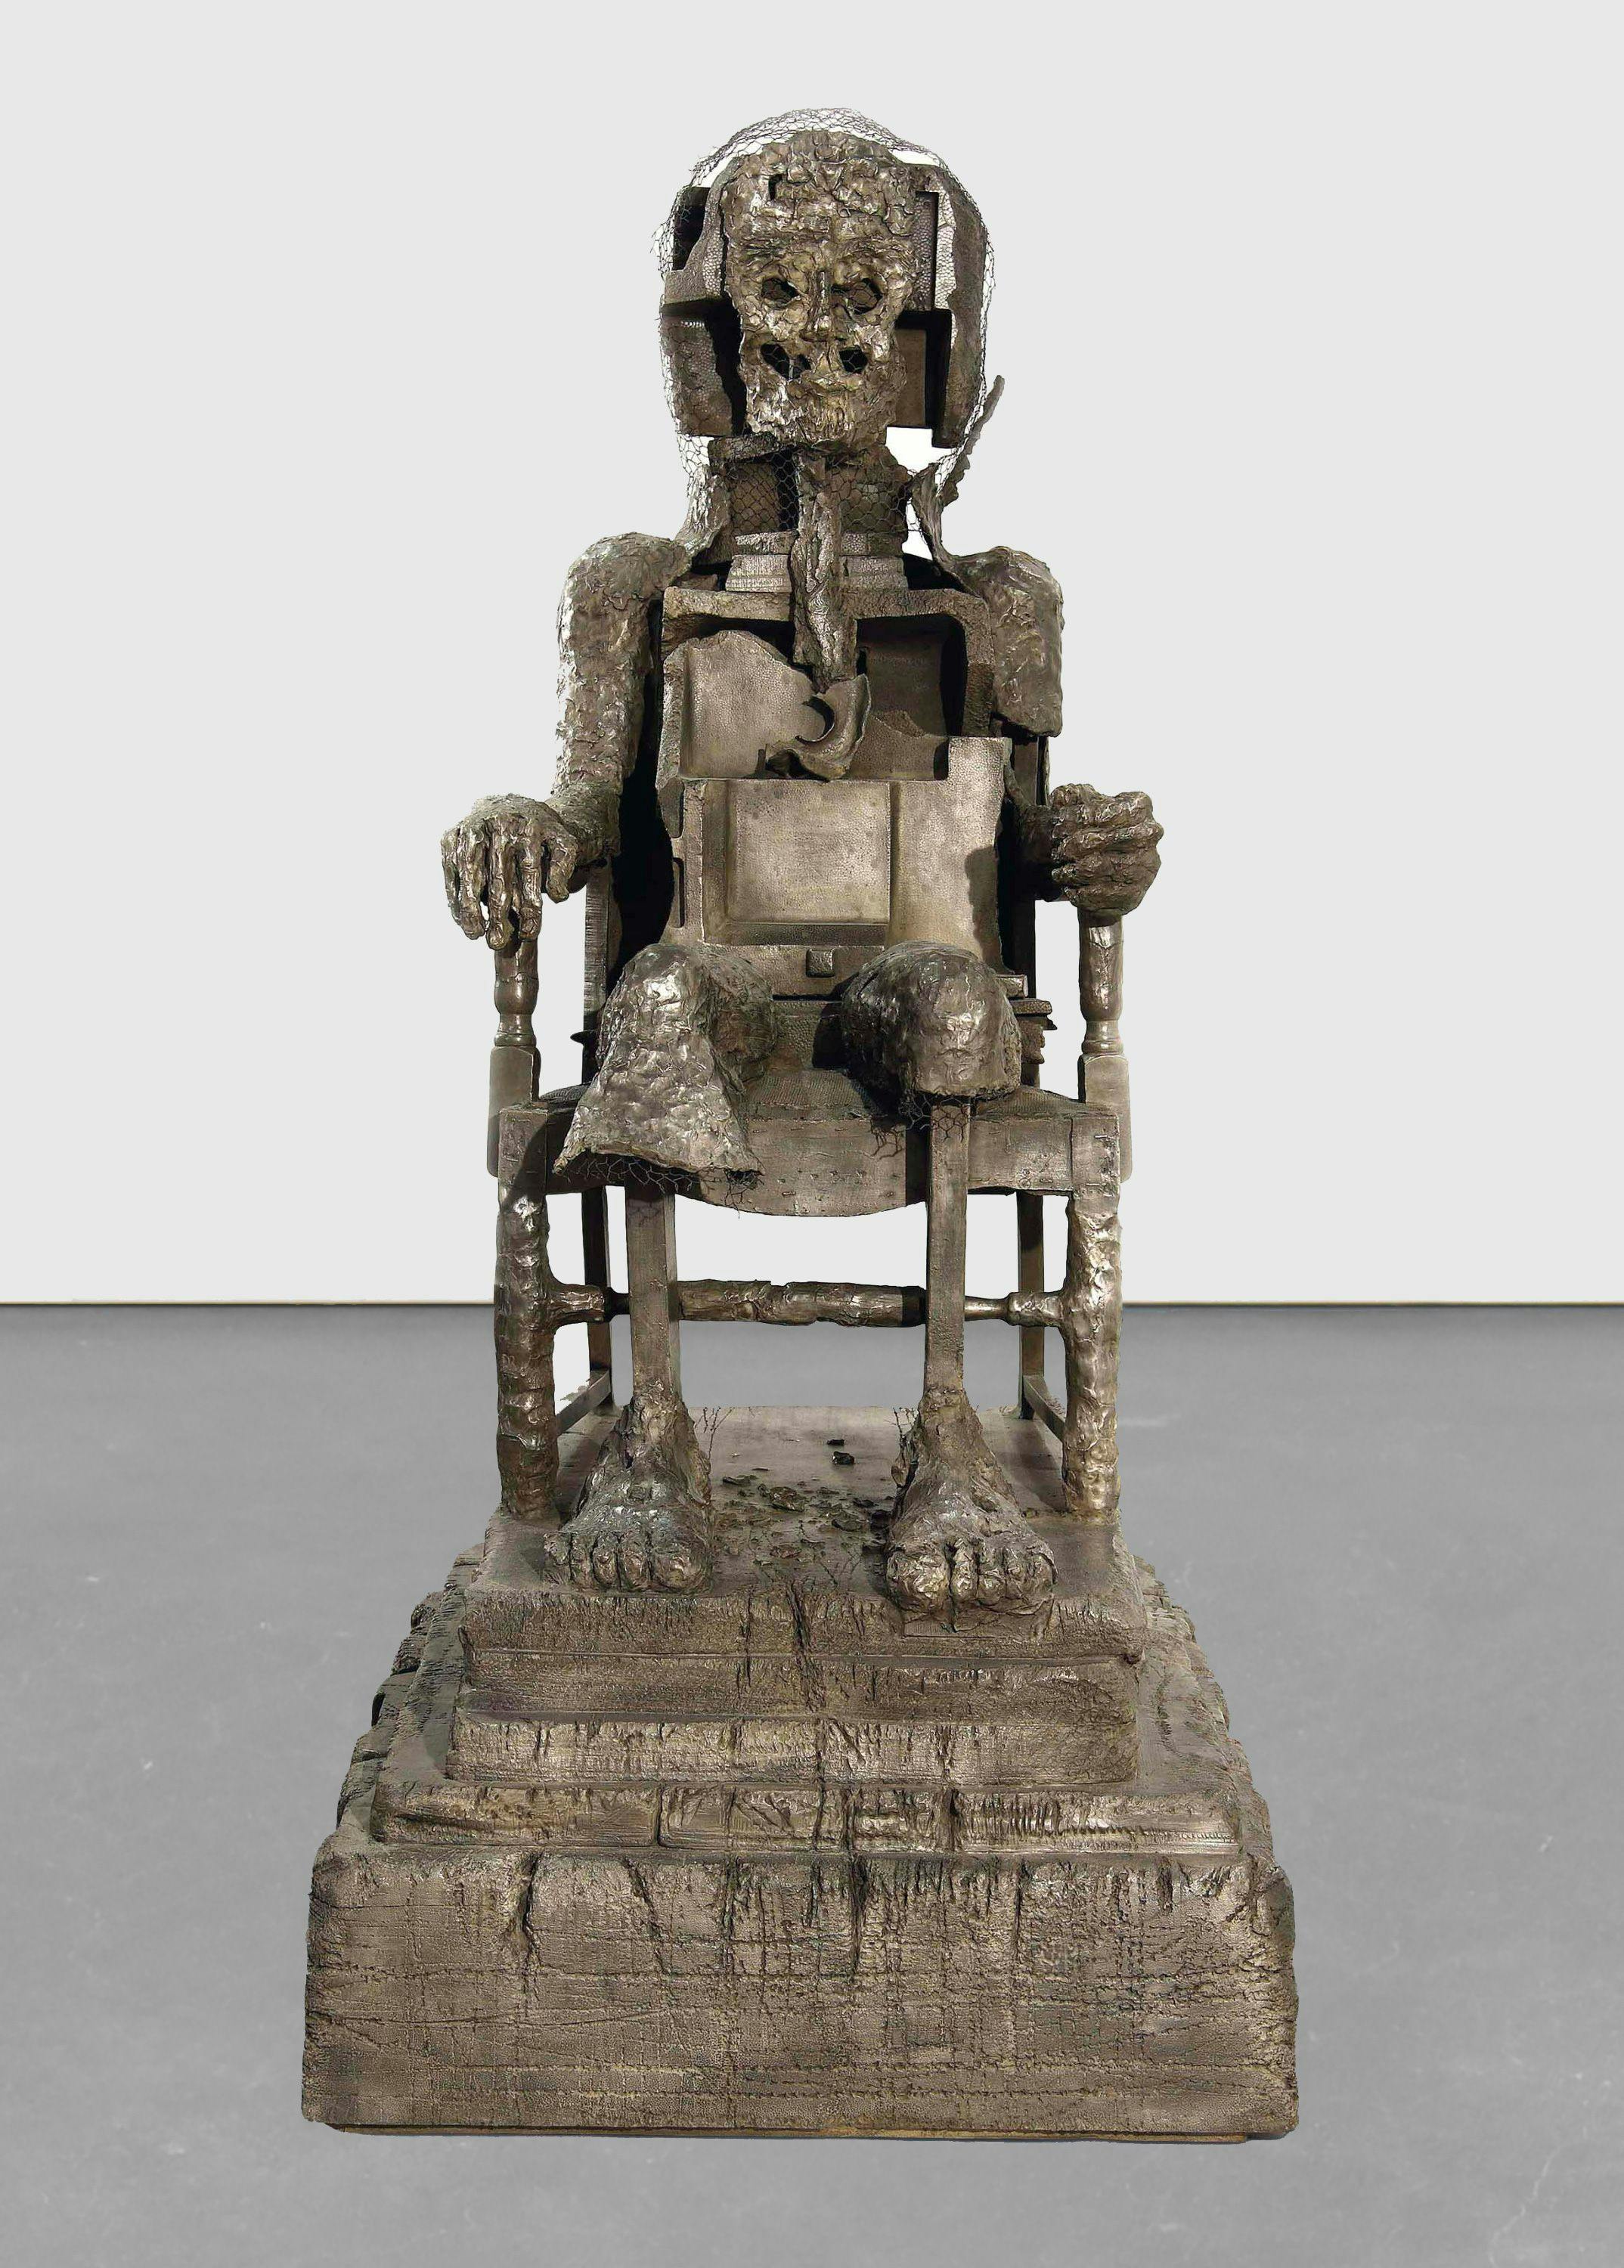 A cast bronze artwork by Huma Bhabha, titled The Orientalist, dated 2007.